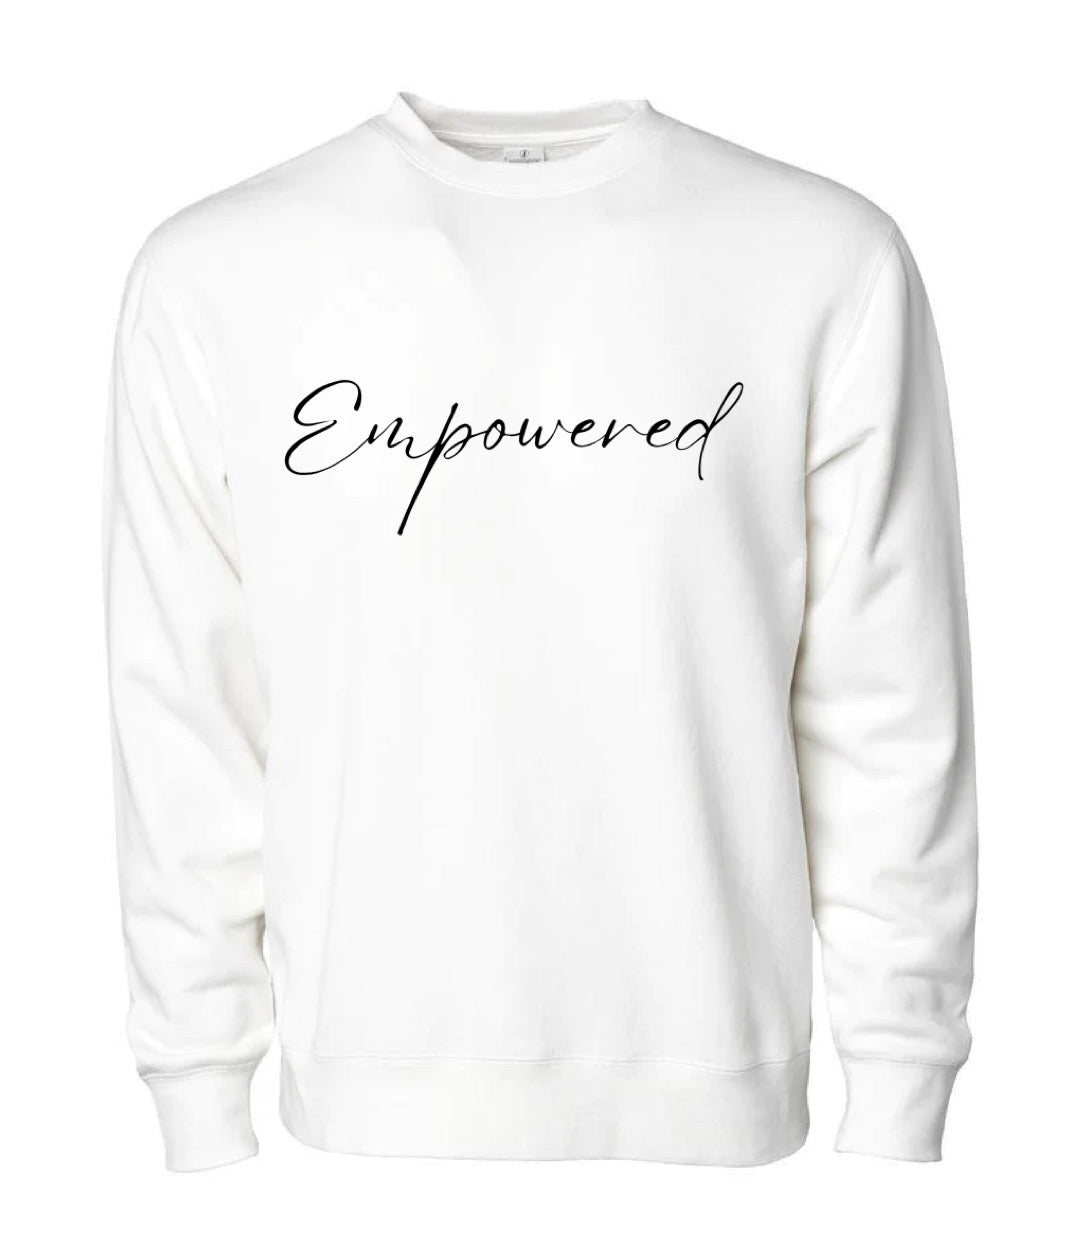 EMPOWERED Midweight Pigment Dyed Crew